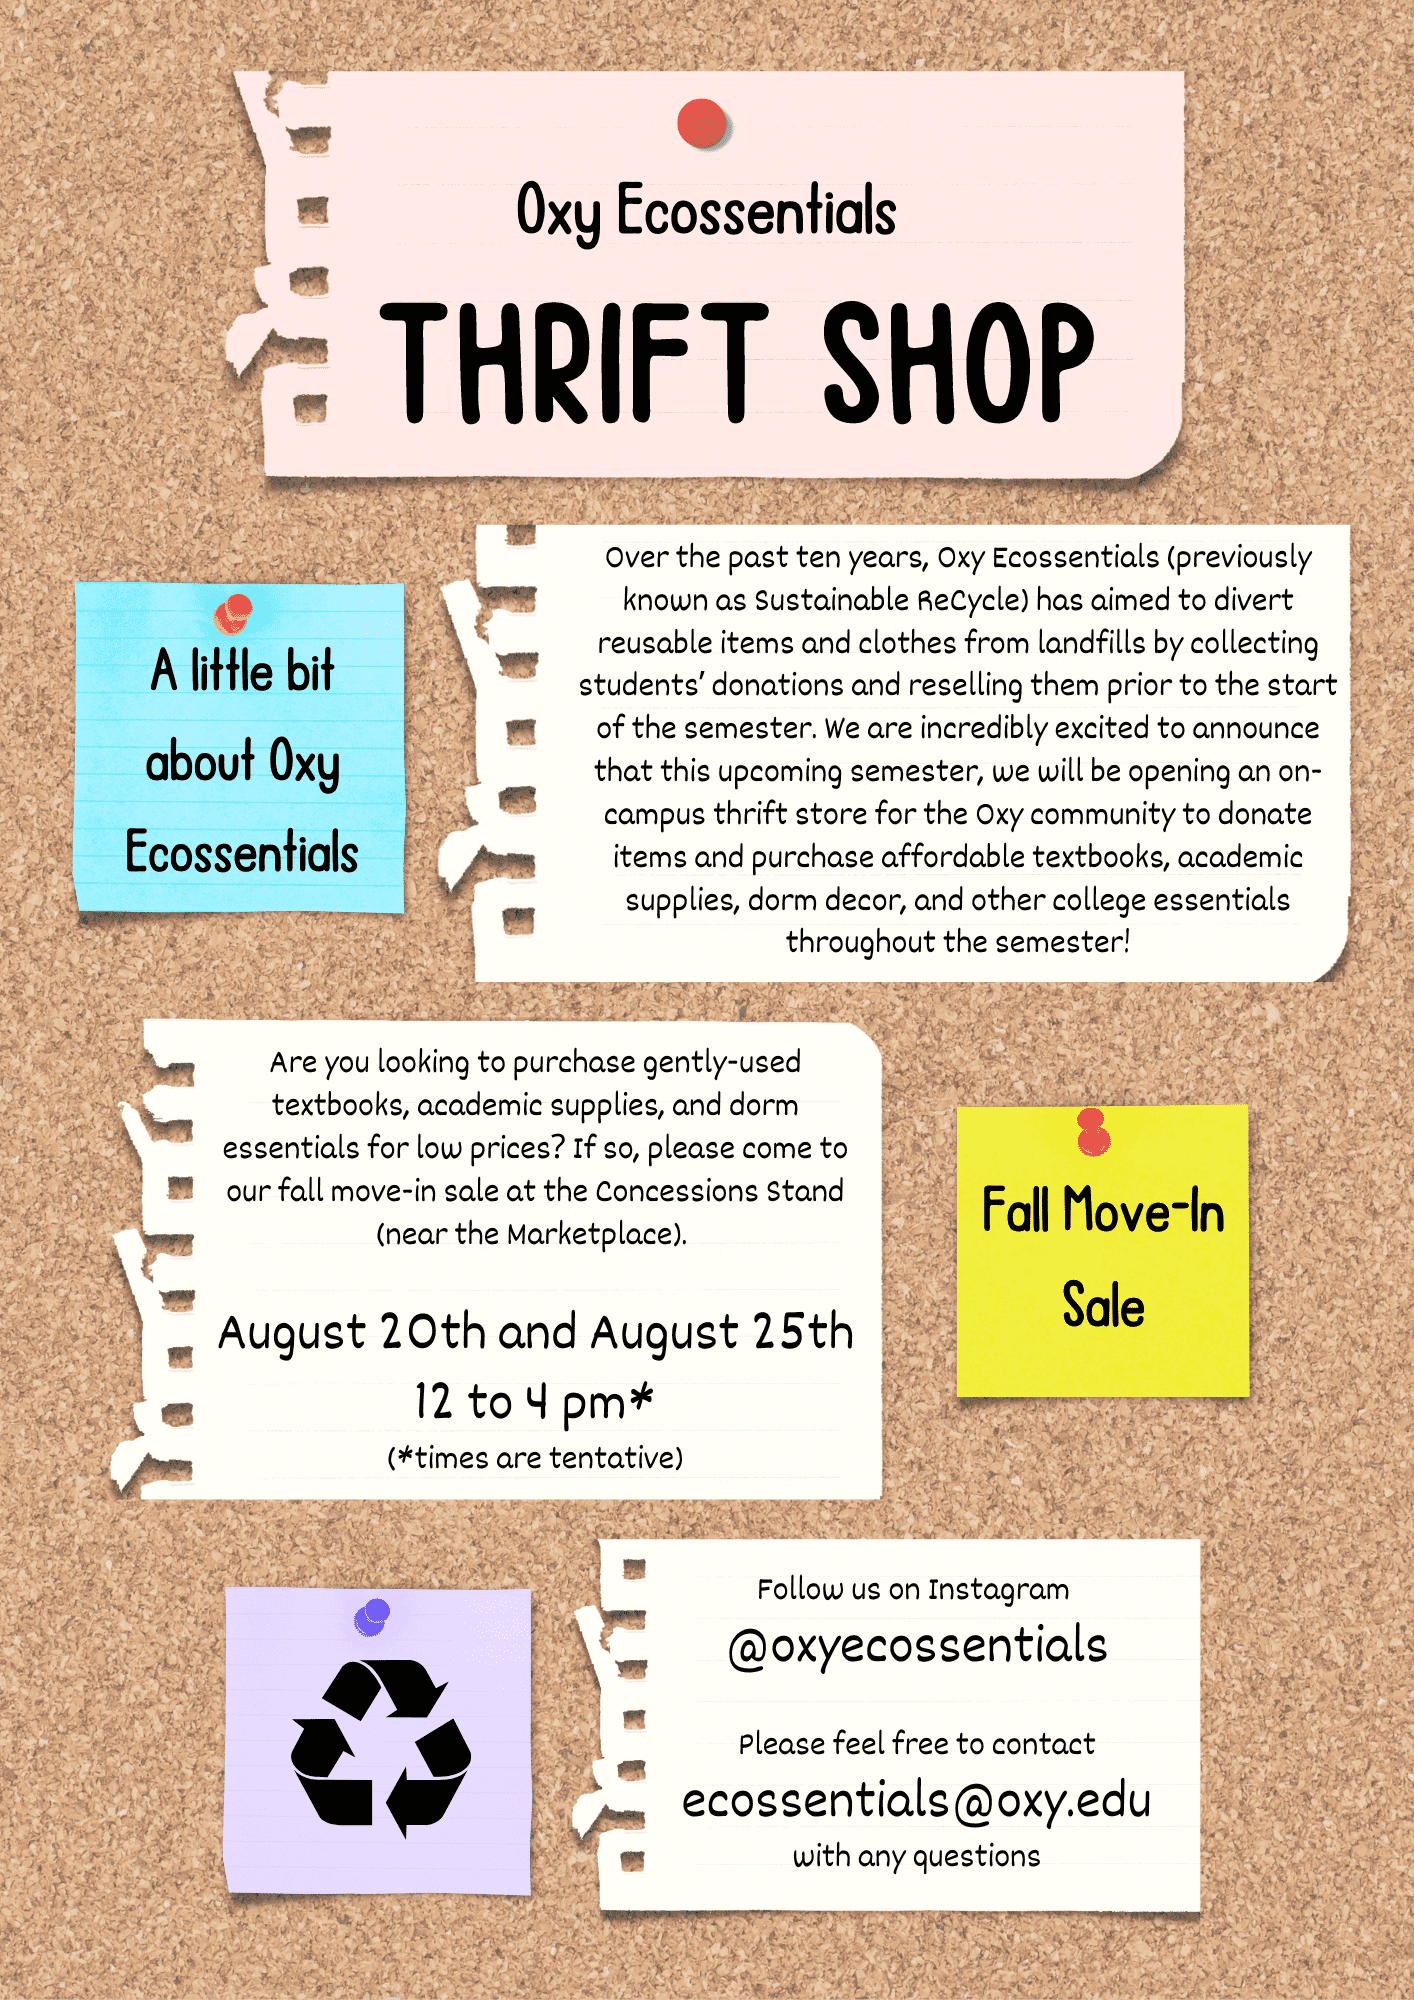 Oxy Ecossentials Flyer with details of fall move in thrift sale, august 20th and 25th, includes info about the club's history